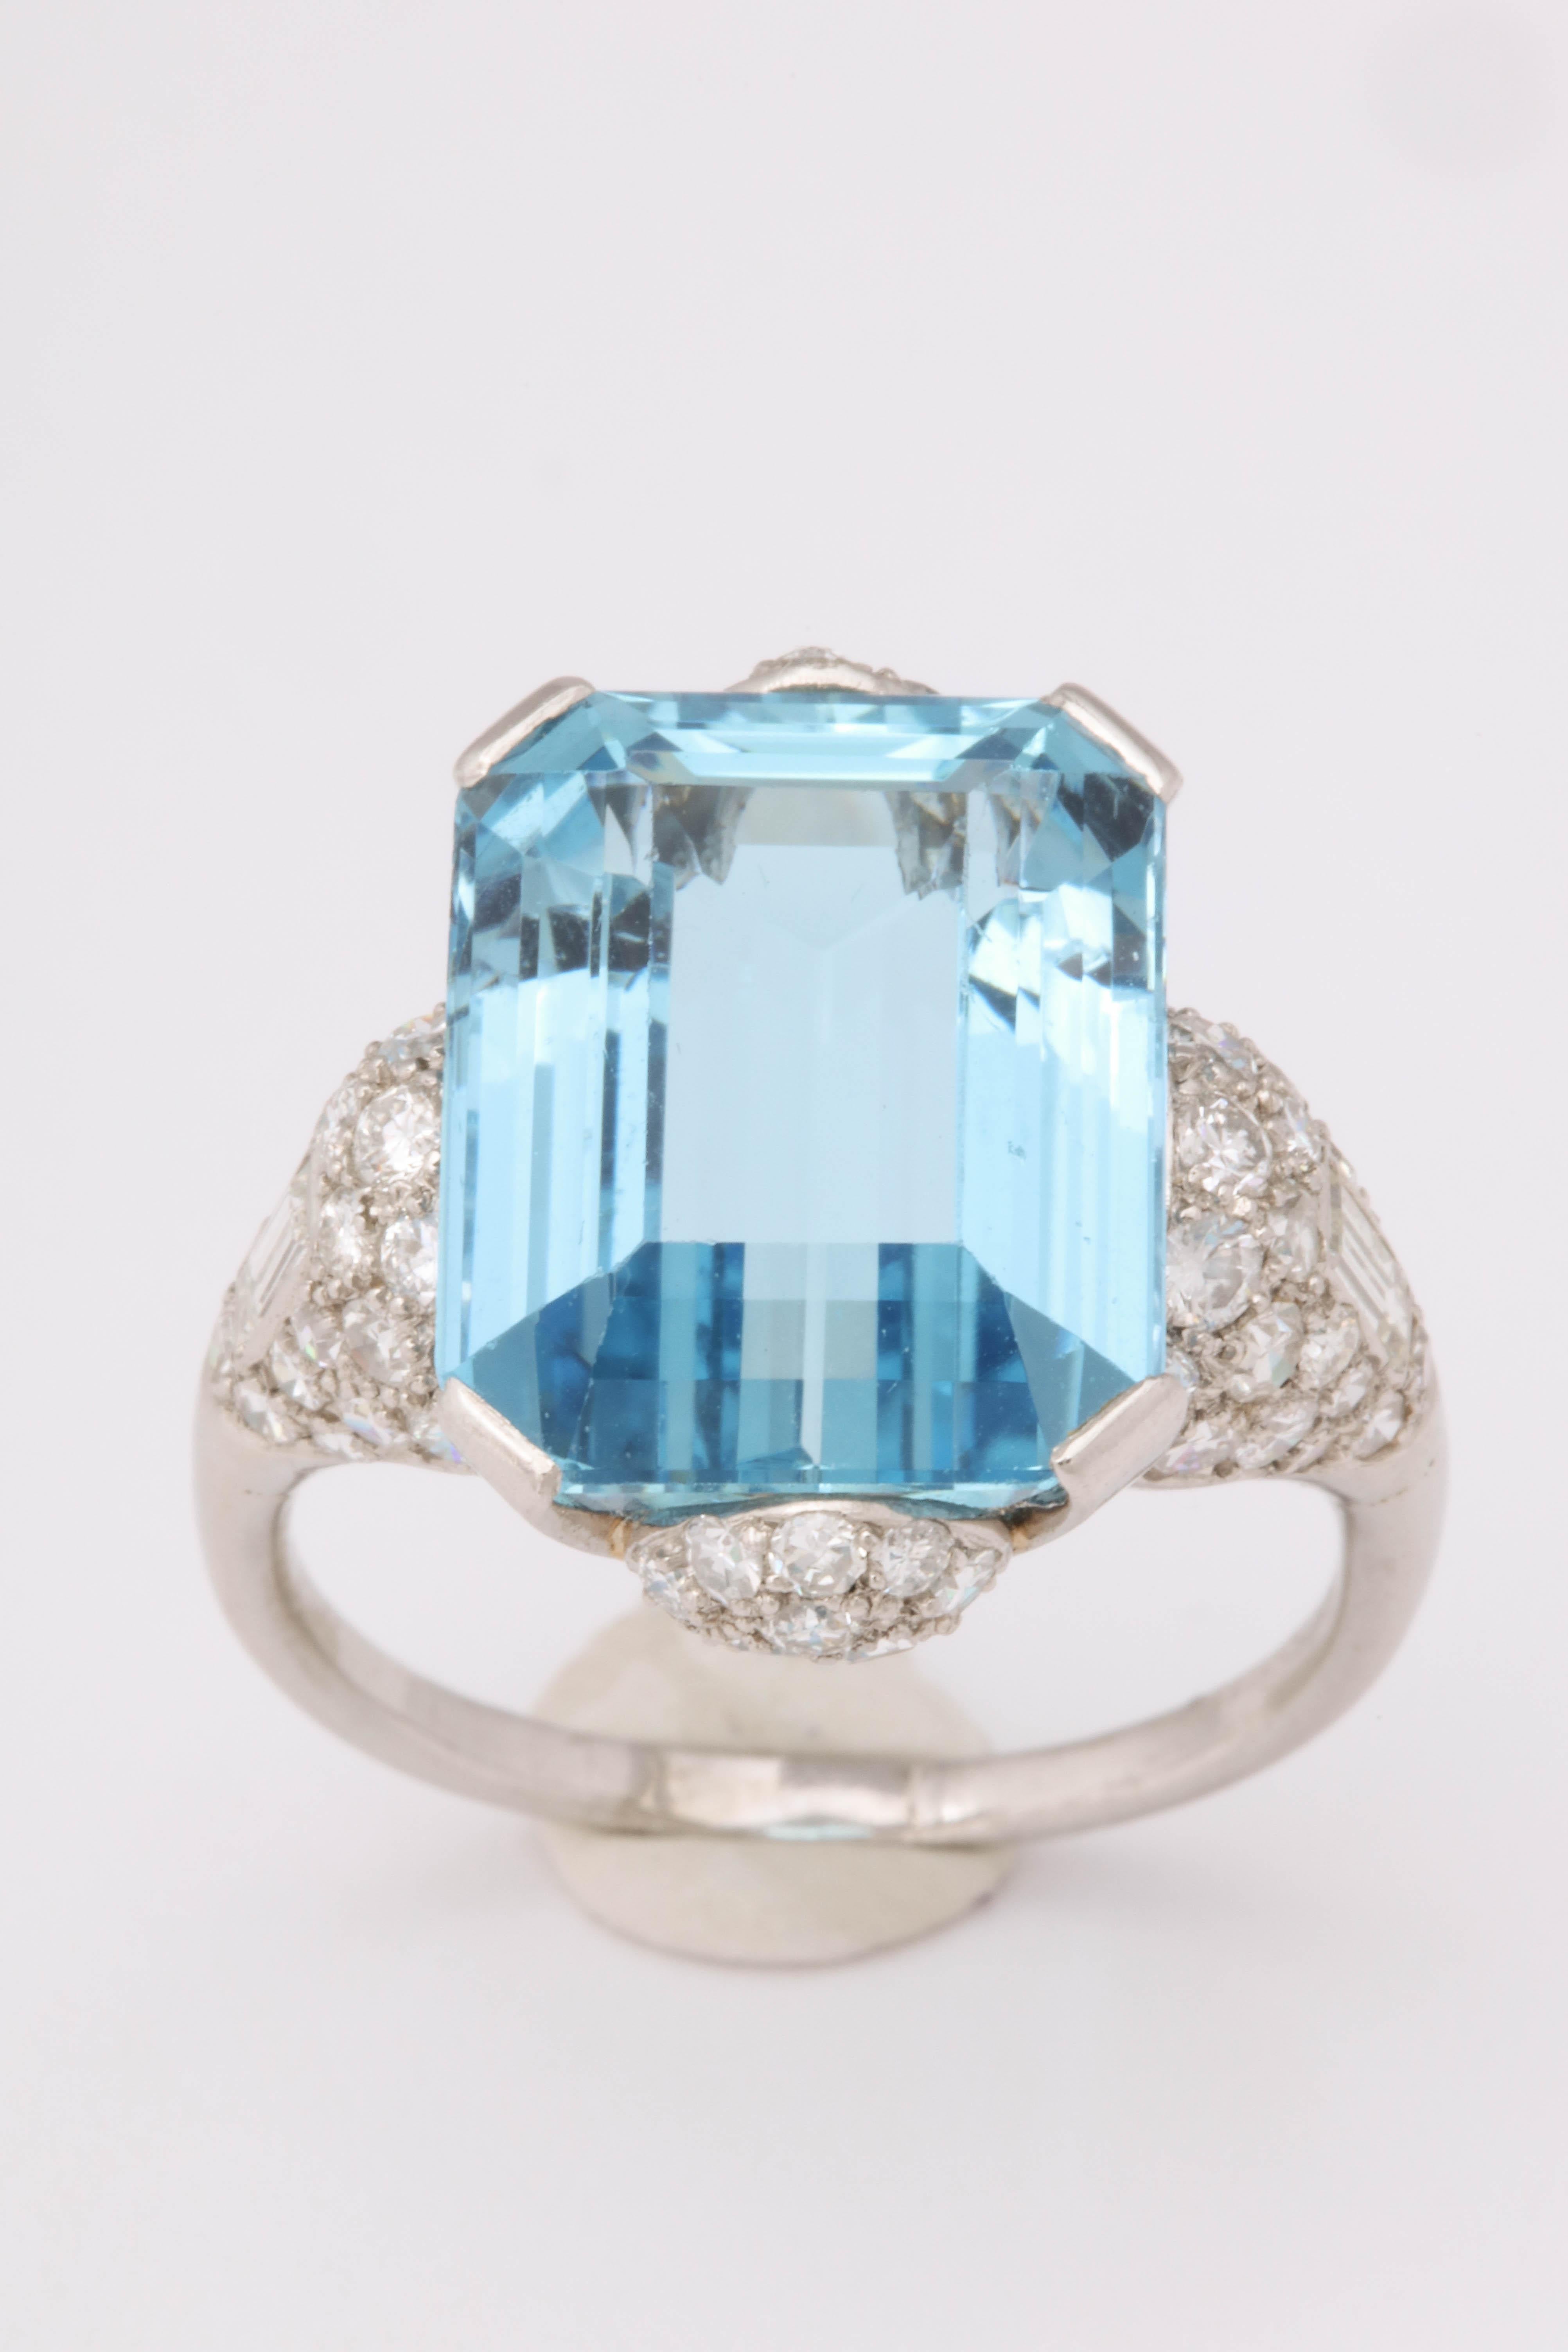 10.1 ct aquamarine set in a platinum mount. The mount is set with varying old cut diamonds including baguettes on the shoulders. Diamonds also set north/south of the aqua. Stunning mount and stones, made c. 1935. 